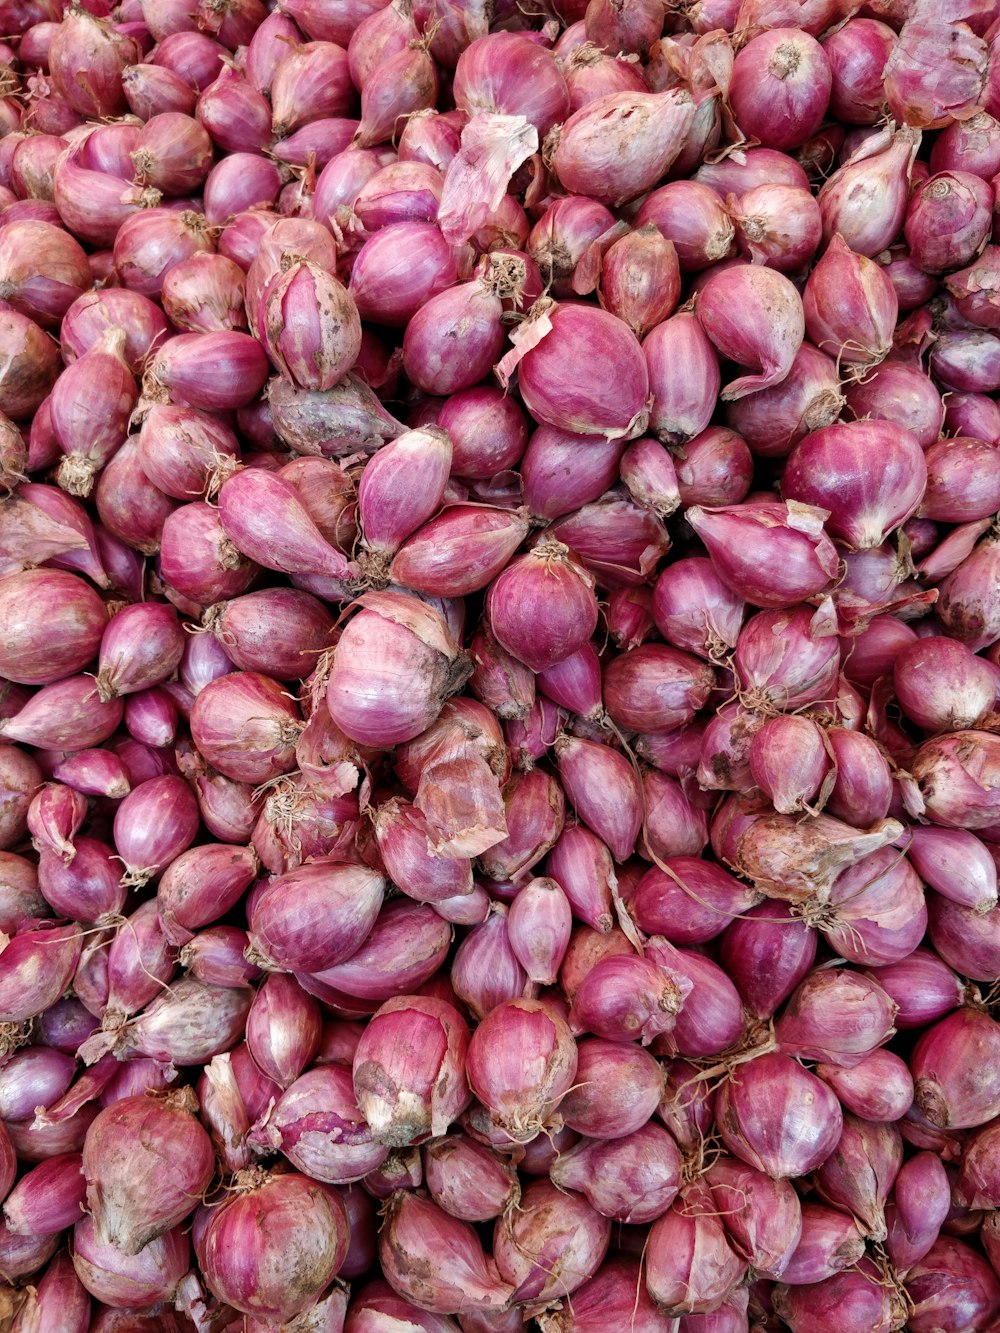 Shallot Free Stock Photos, Images, and Pictures of Shallot